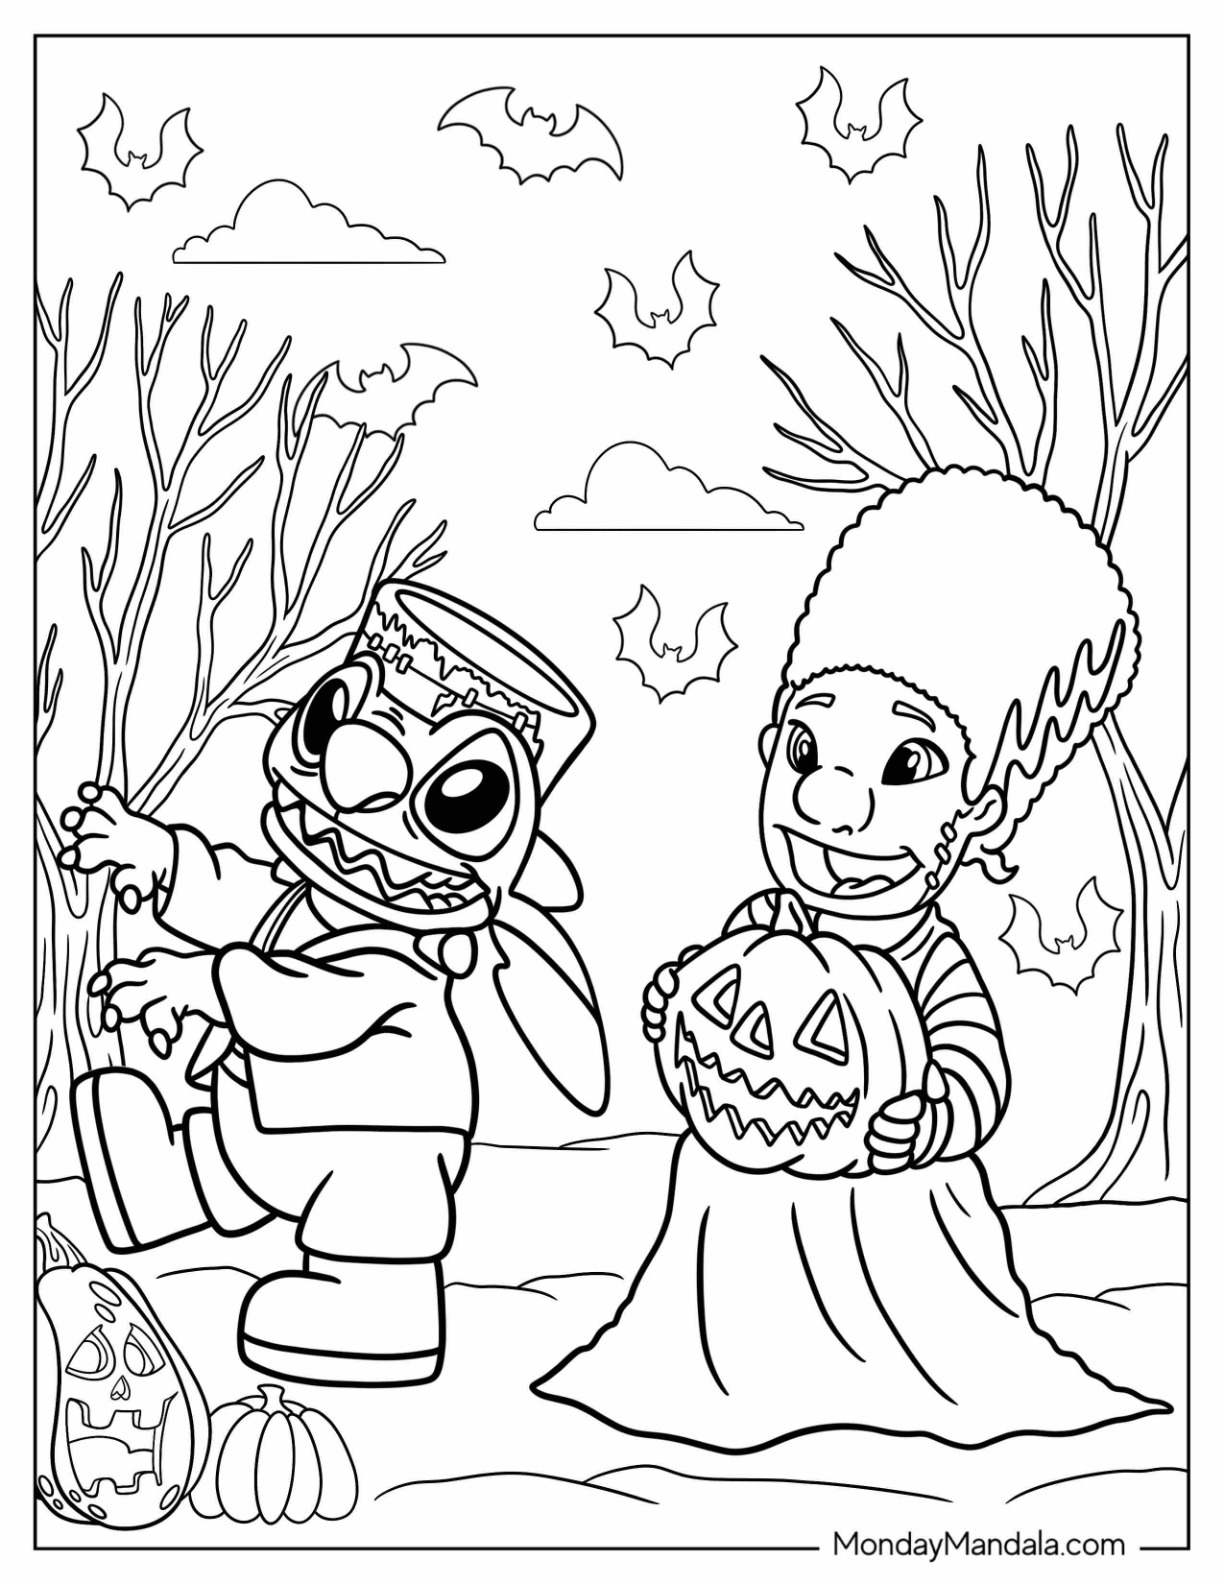 Disney halloween coloring pages free pdf printables